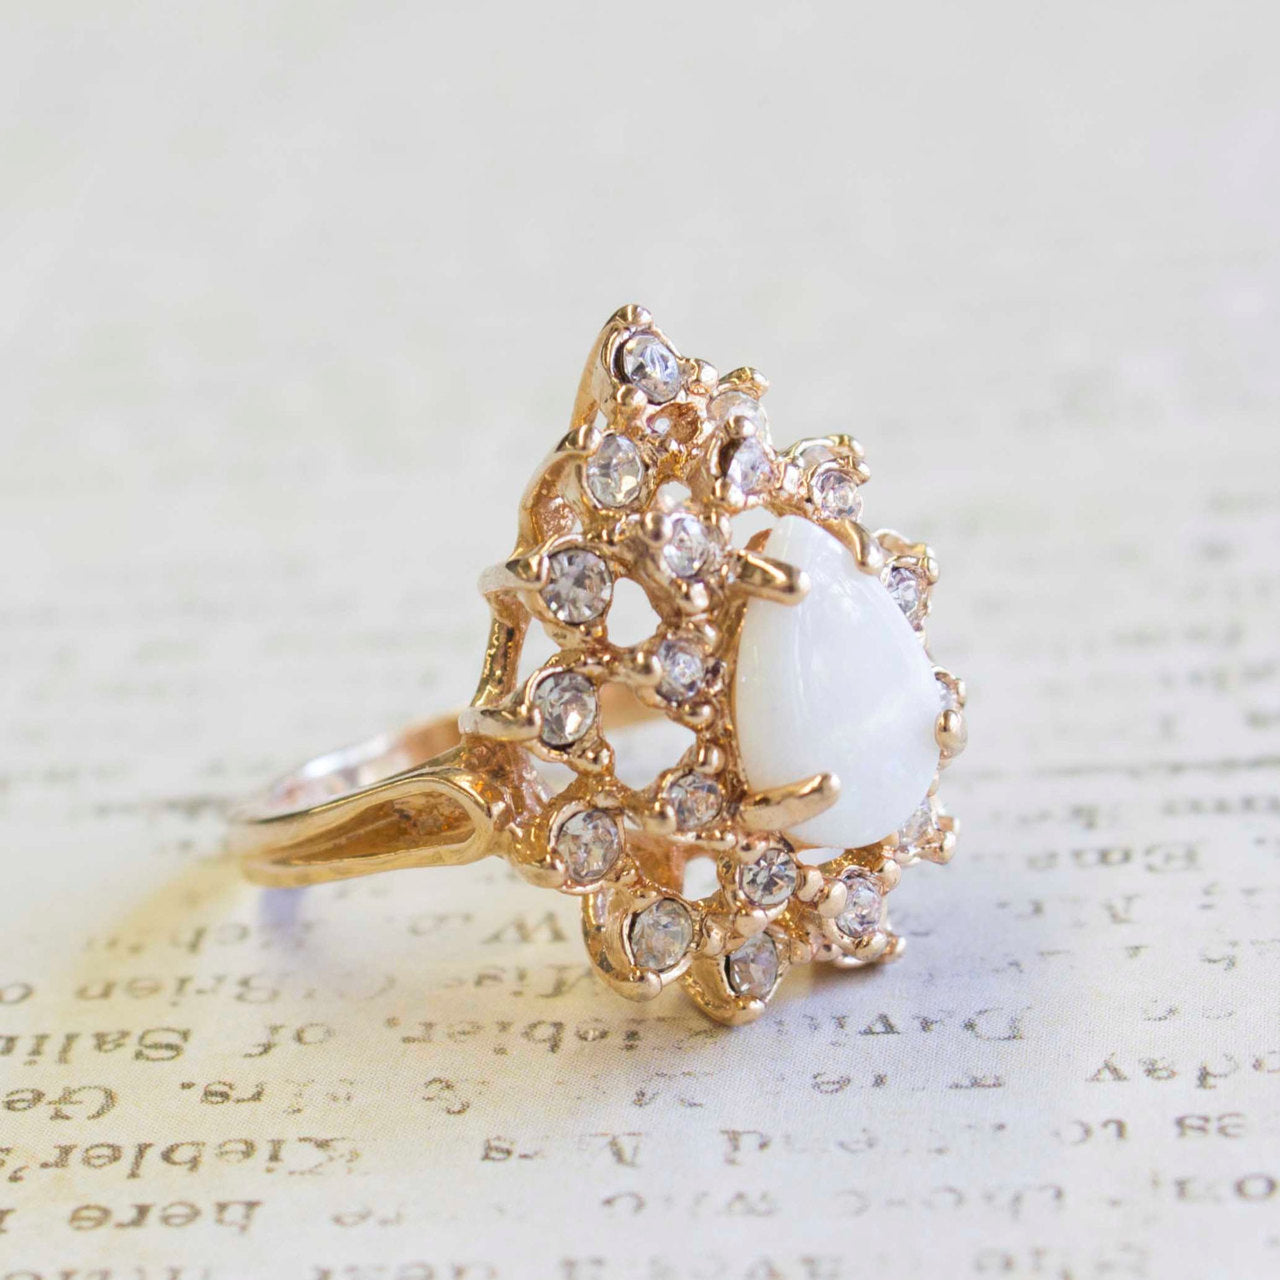 Vintage Victorian Style Genuine Opal with Austrian Crystals 18k Yellow Gold Electroplated Ring